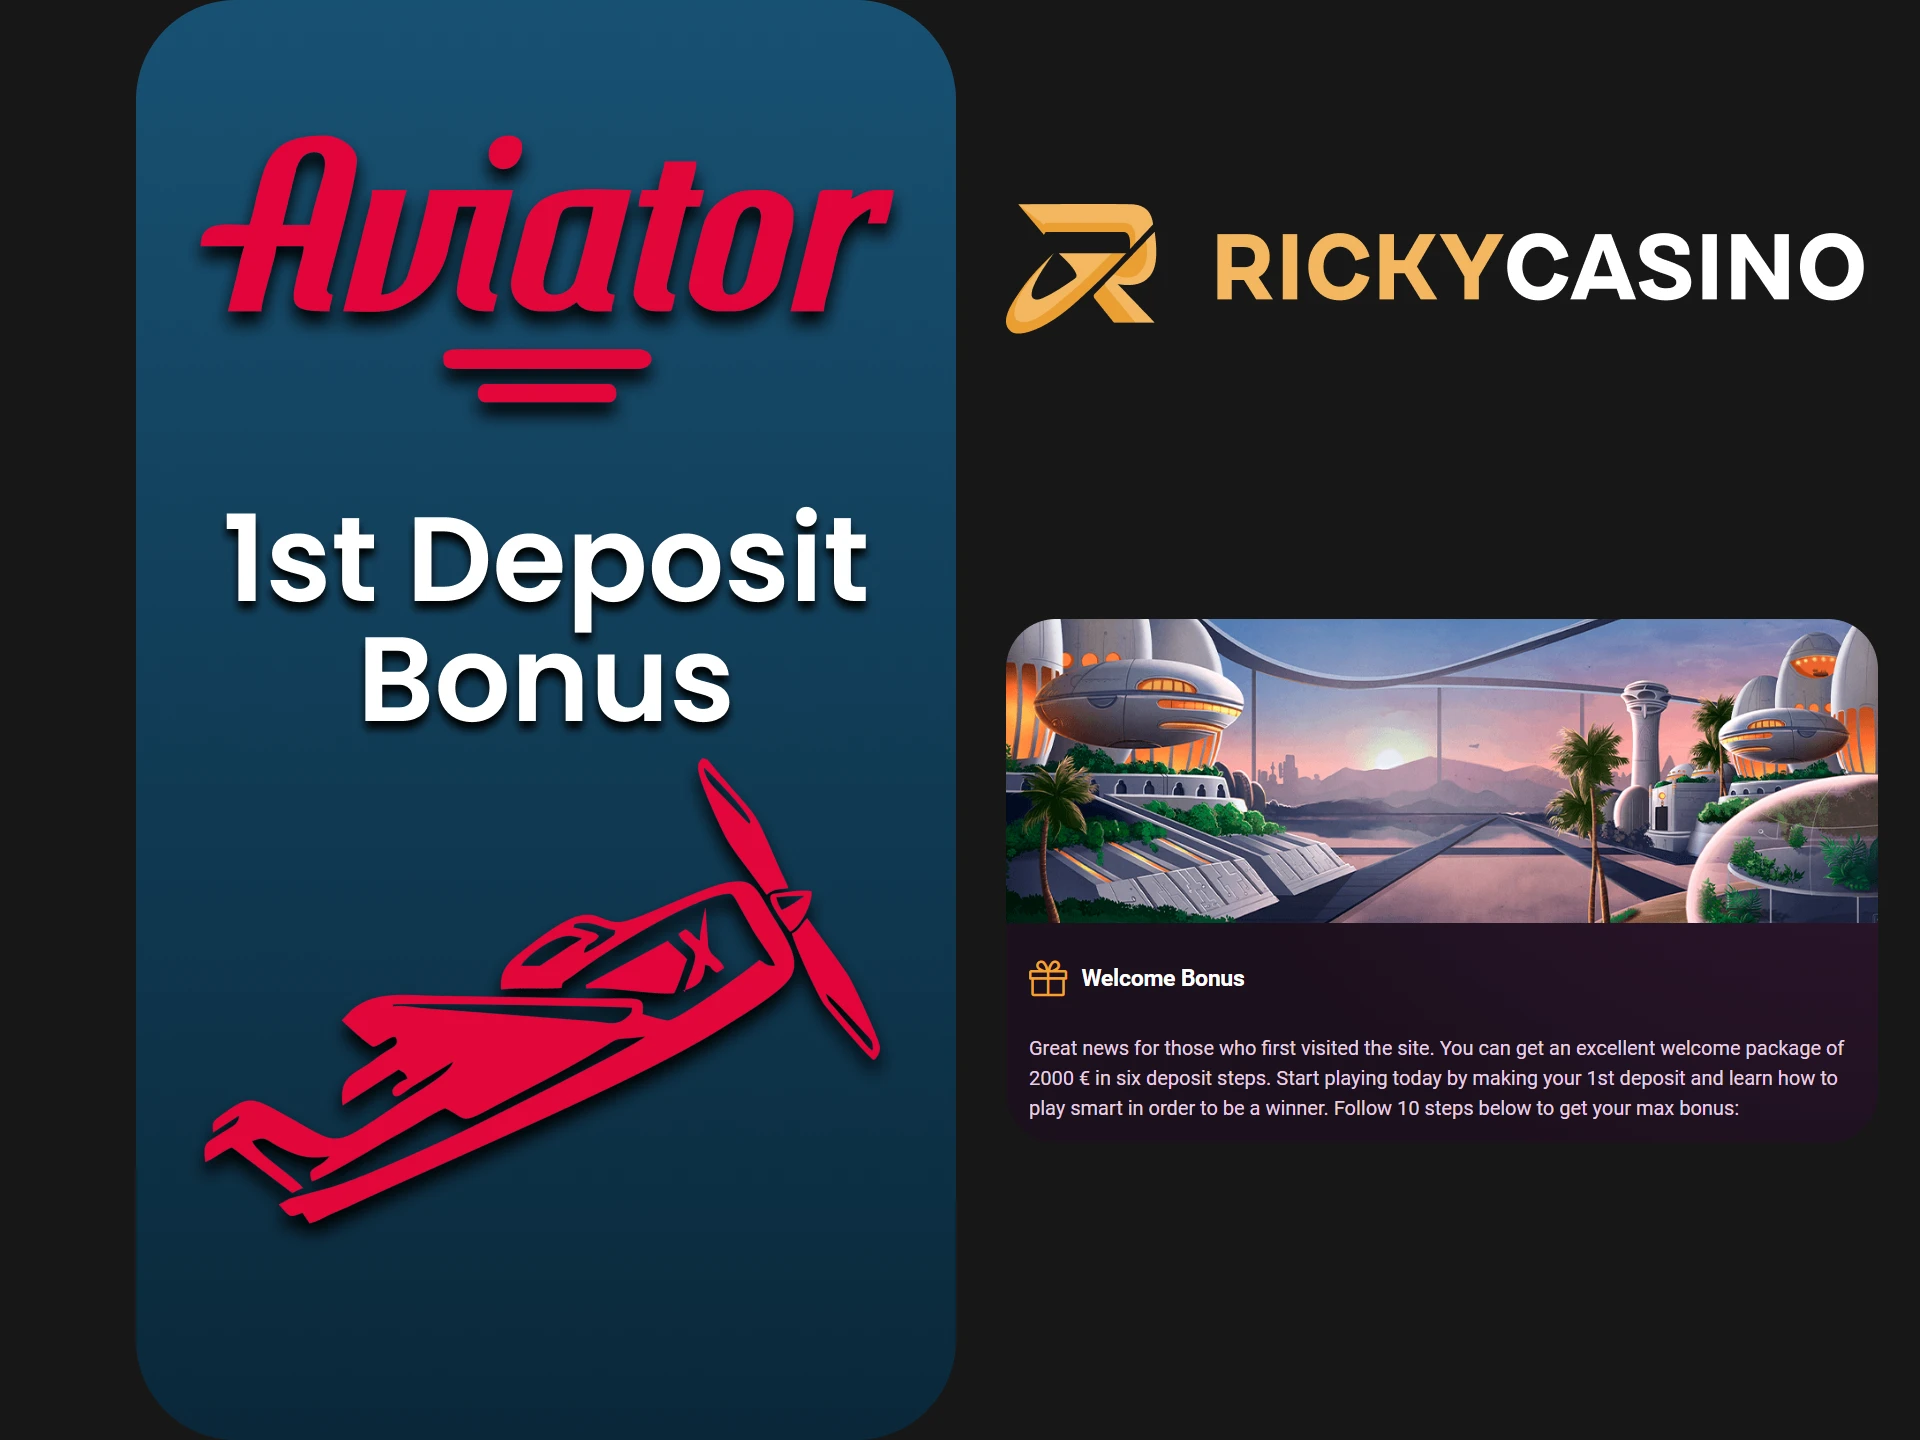 Top up your deposit and get a bonus for Aviator from Ricky Casino.